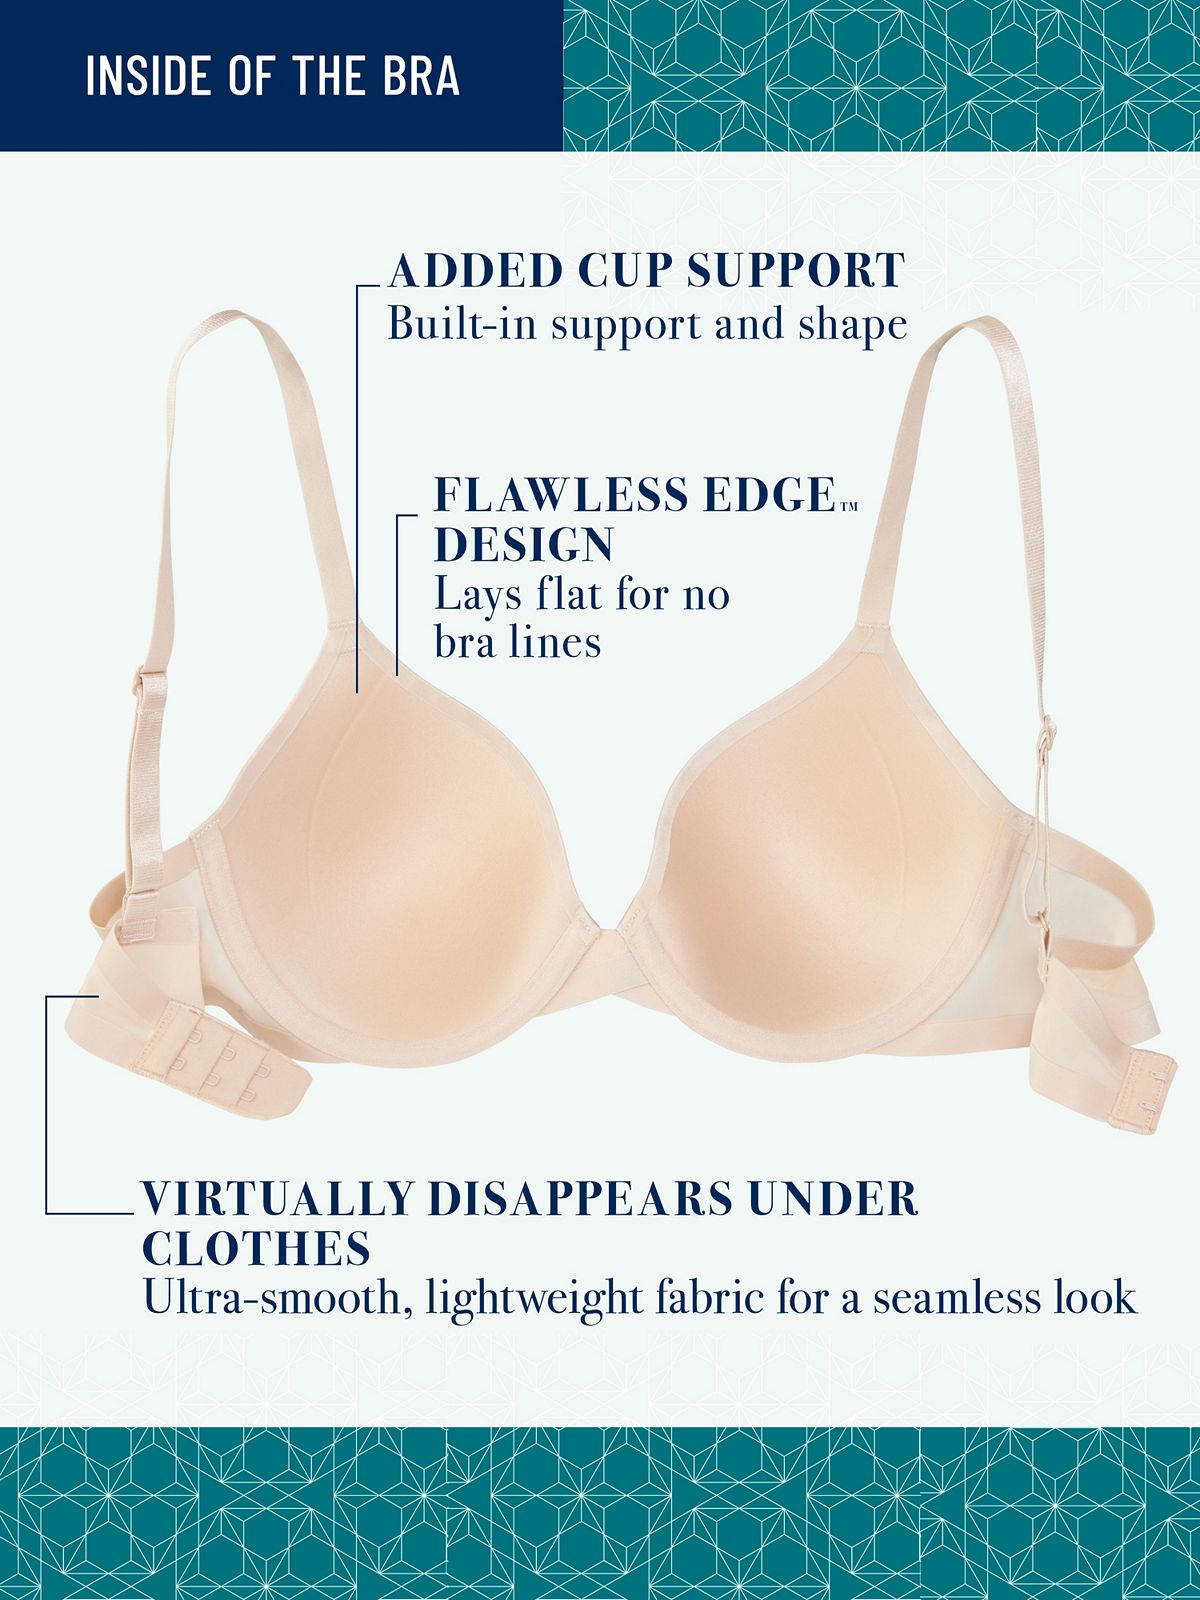 Vanity Fair Nearly Invisible Full Coverage Underwire Bra 75201 In The Buff